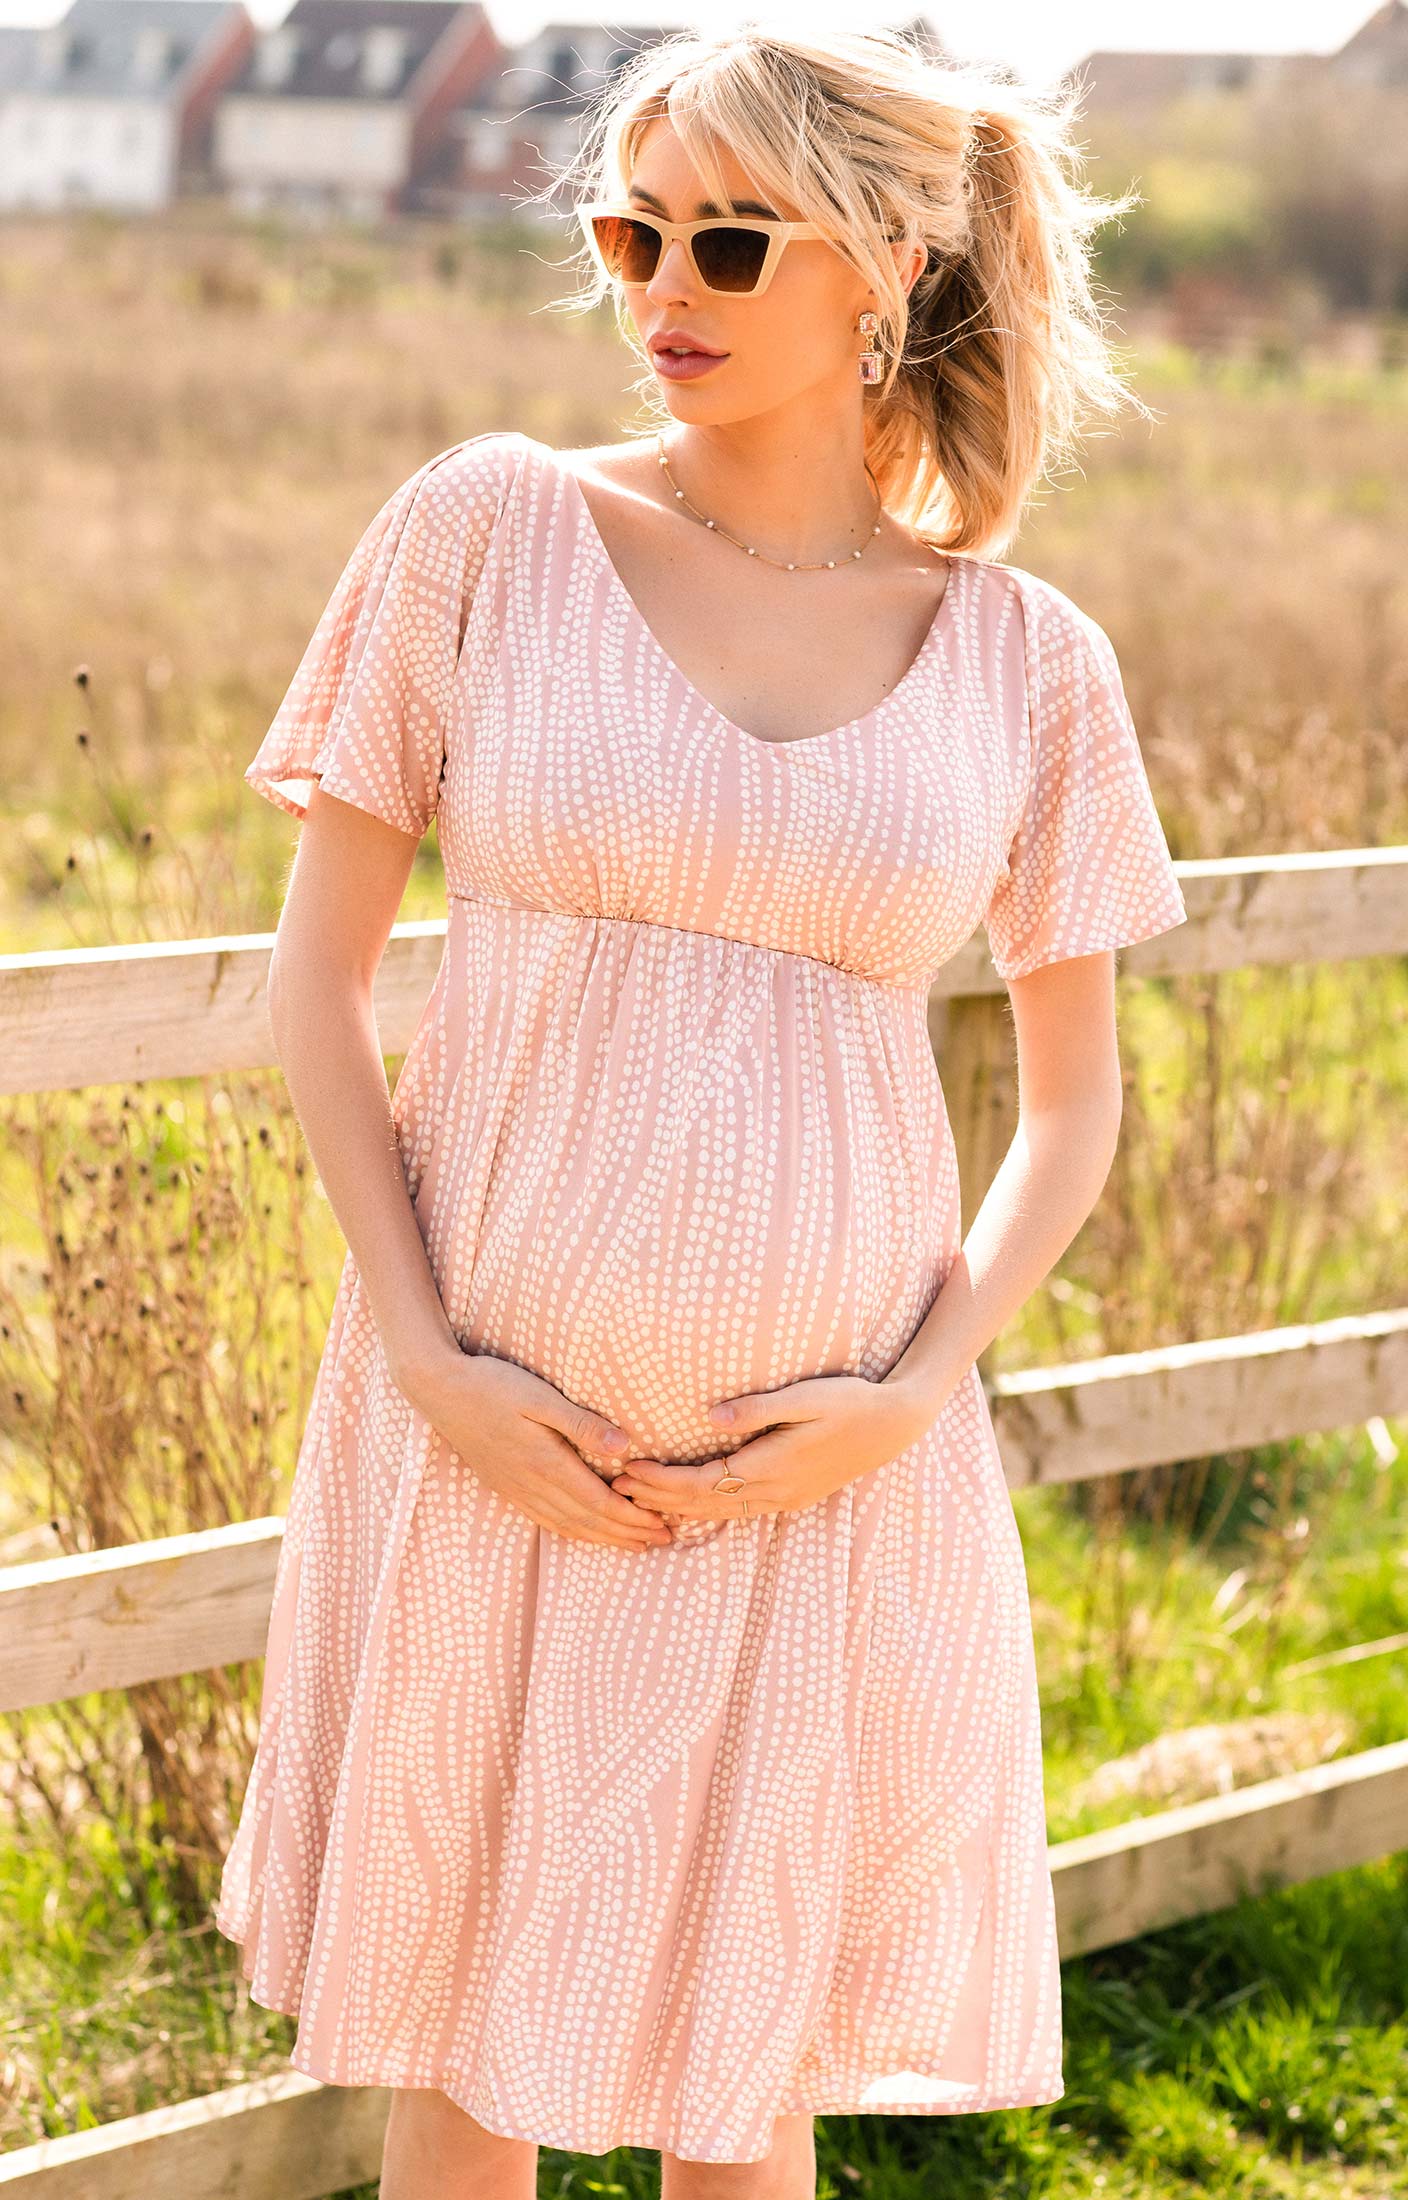 Kimono Maternity Dress Dotty Pink - Maternity Wedding Dresses, Evening Wear  and Party Clothes by Tiffany Rose